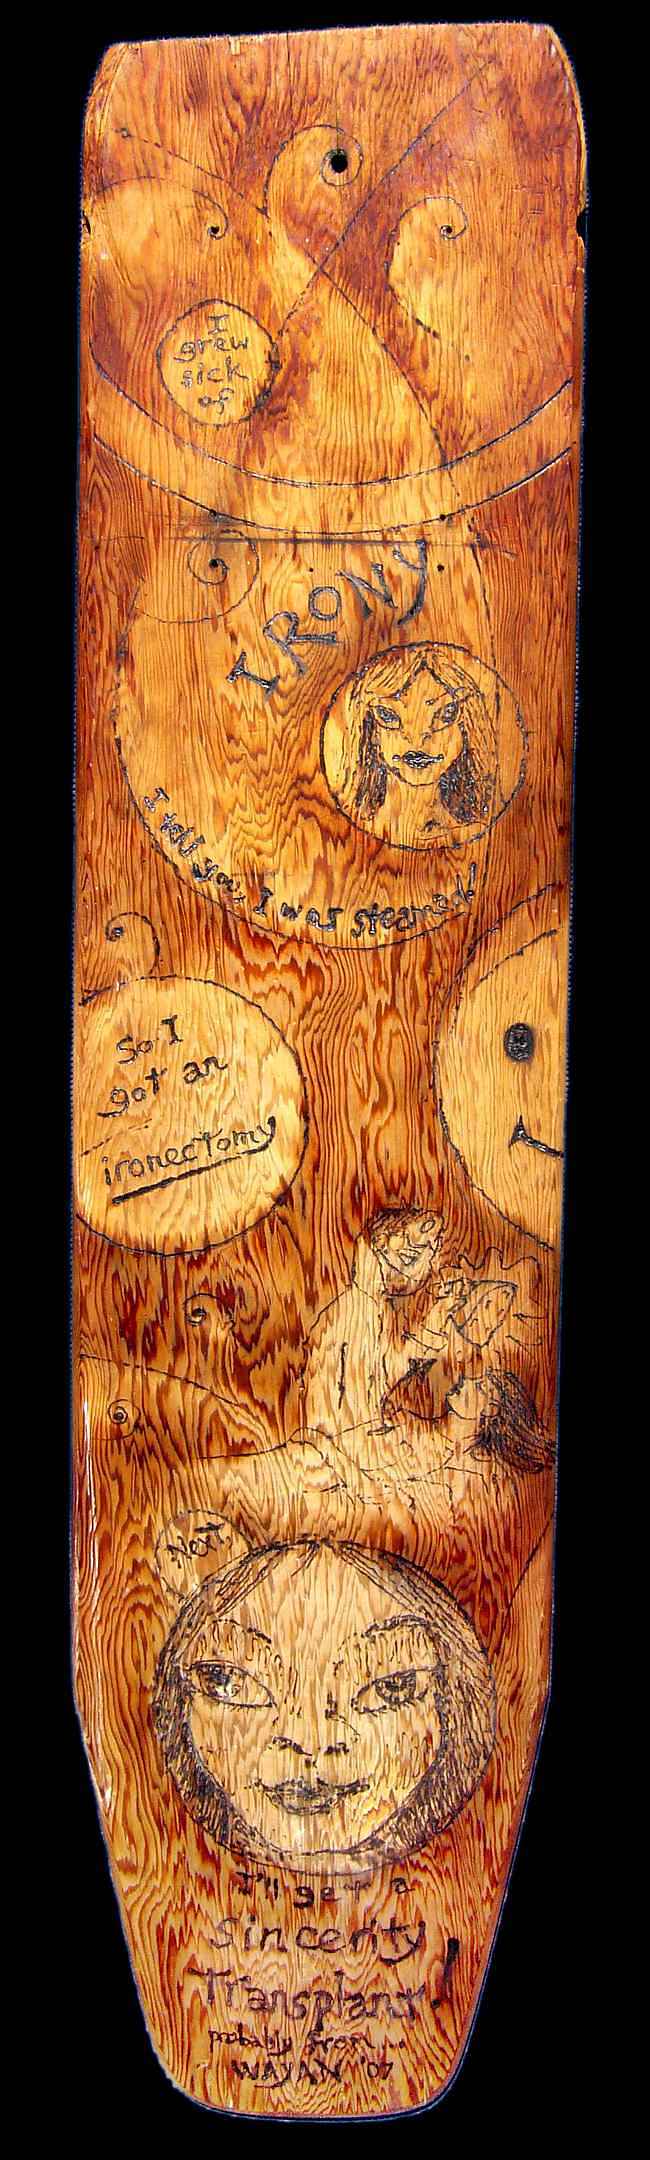 Old wooden ironing board with strong woodgrain; cartoons cut and burned into it. Words read: 'I grew sick of irony. I tell you, I was steamed! So I got an ironectomy.  Next, I'll get a sincerity transplant! Probably from... Wayan 2007'